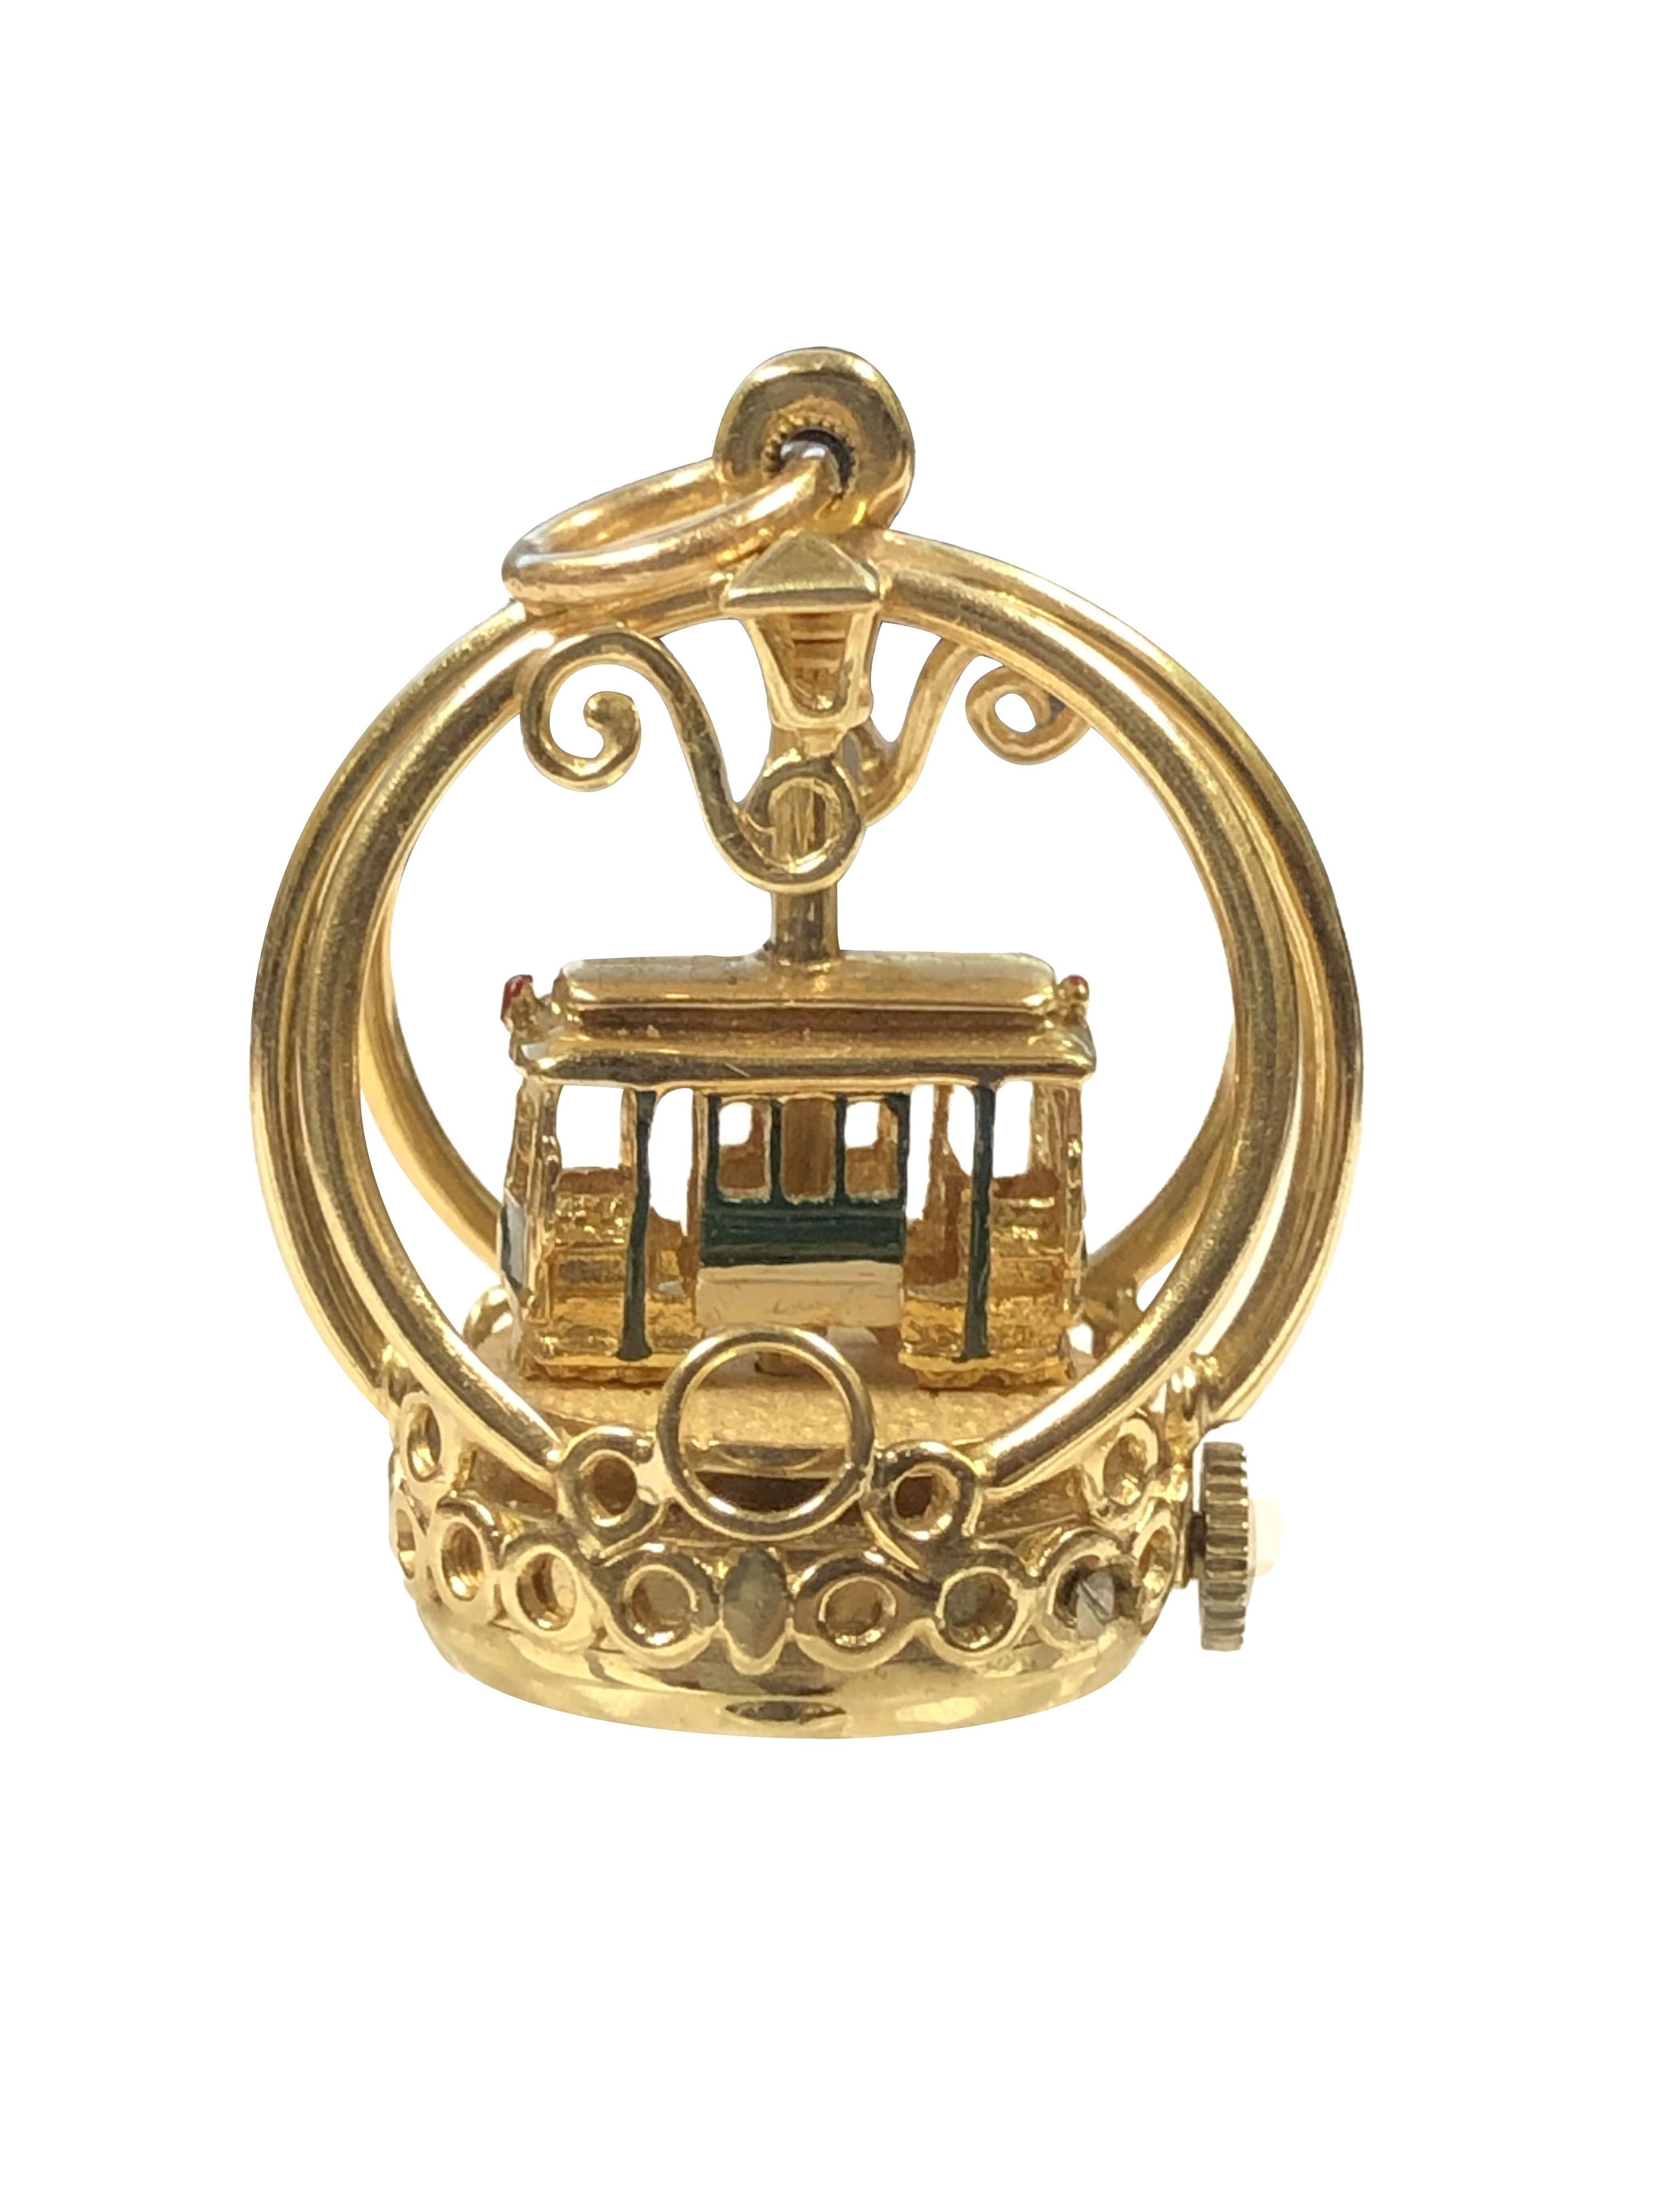 Circa 1970s Henry Dankner 14K Yellow Gold and Enamel Street Car Charm, measuring 1 3/8 inches in height 3/4 inch in diameter and weighing 16.7 Grams. Powered by a Mechanical modified Wrist Watch movement, when wound the Street Car slowly spins